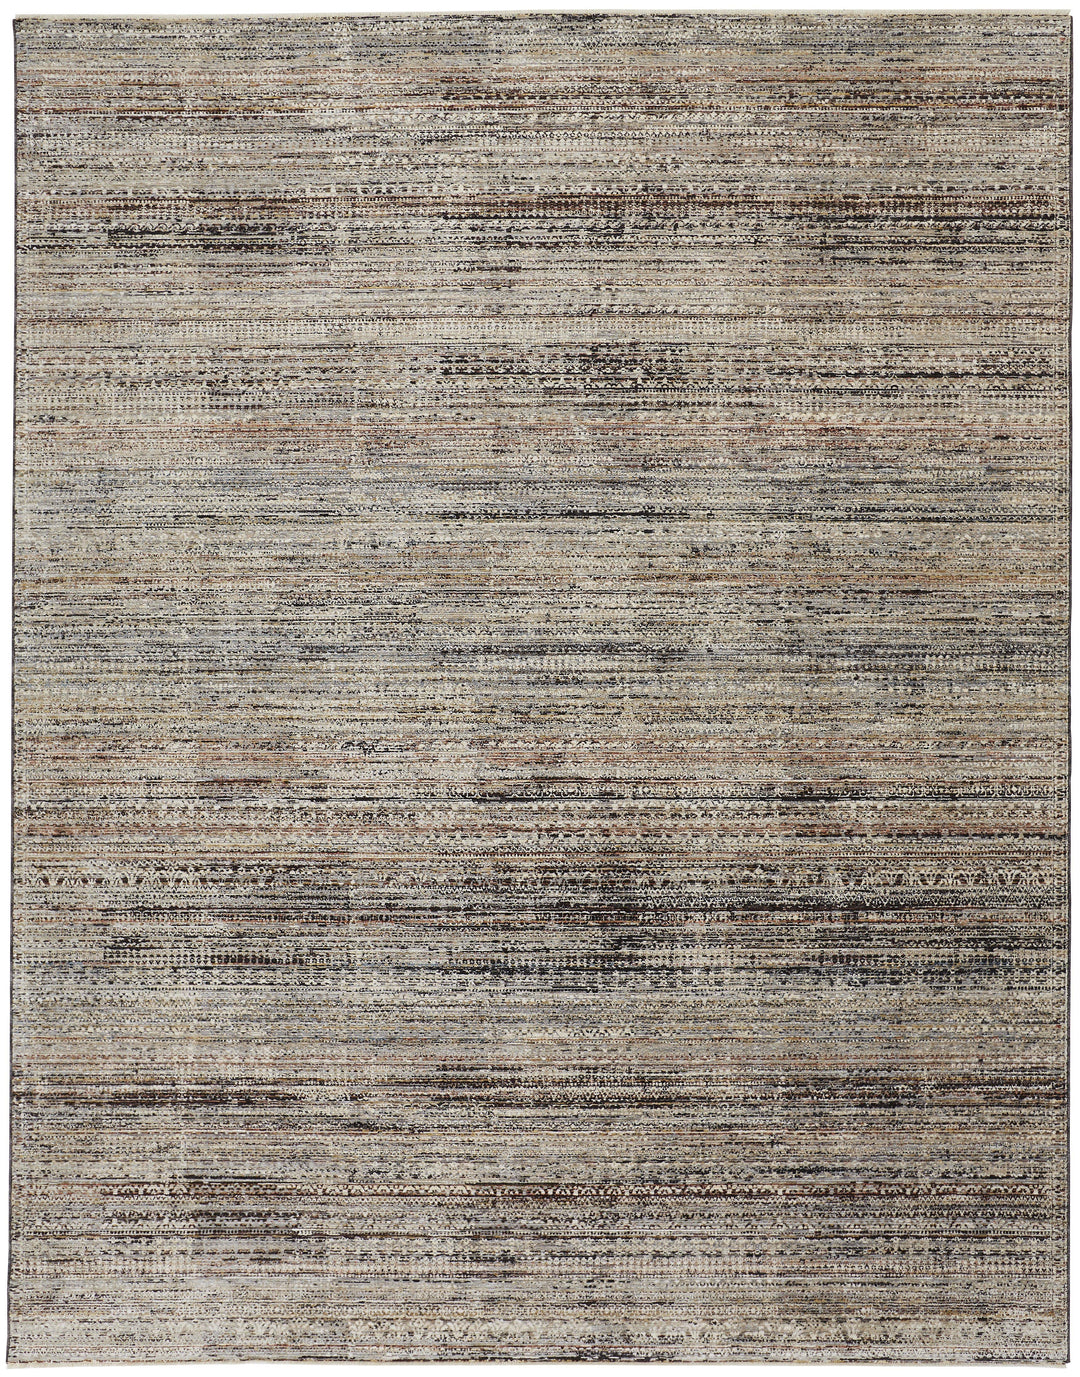 Feizy Feizy Caprio Space Dyed Ornamental Rug - Ivory Sand & Rust - Available in 9 Sizes 2' x 3'-4" 9203959FMLT000A25